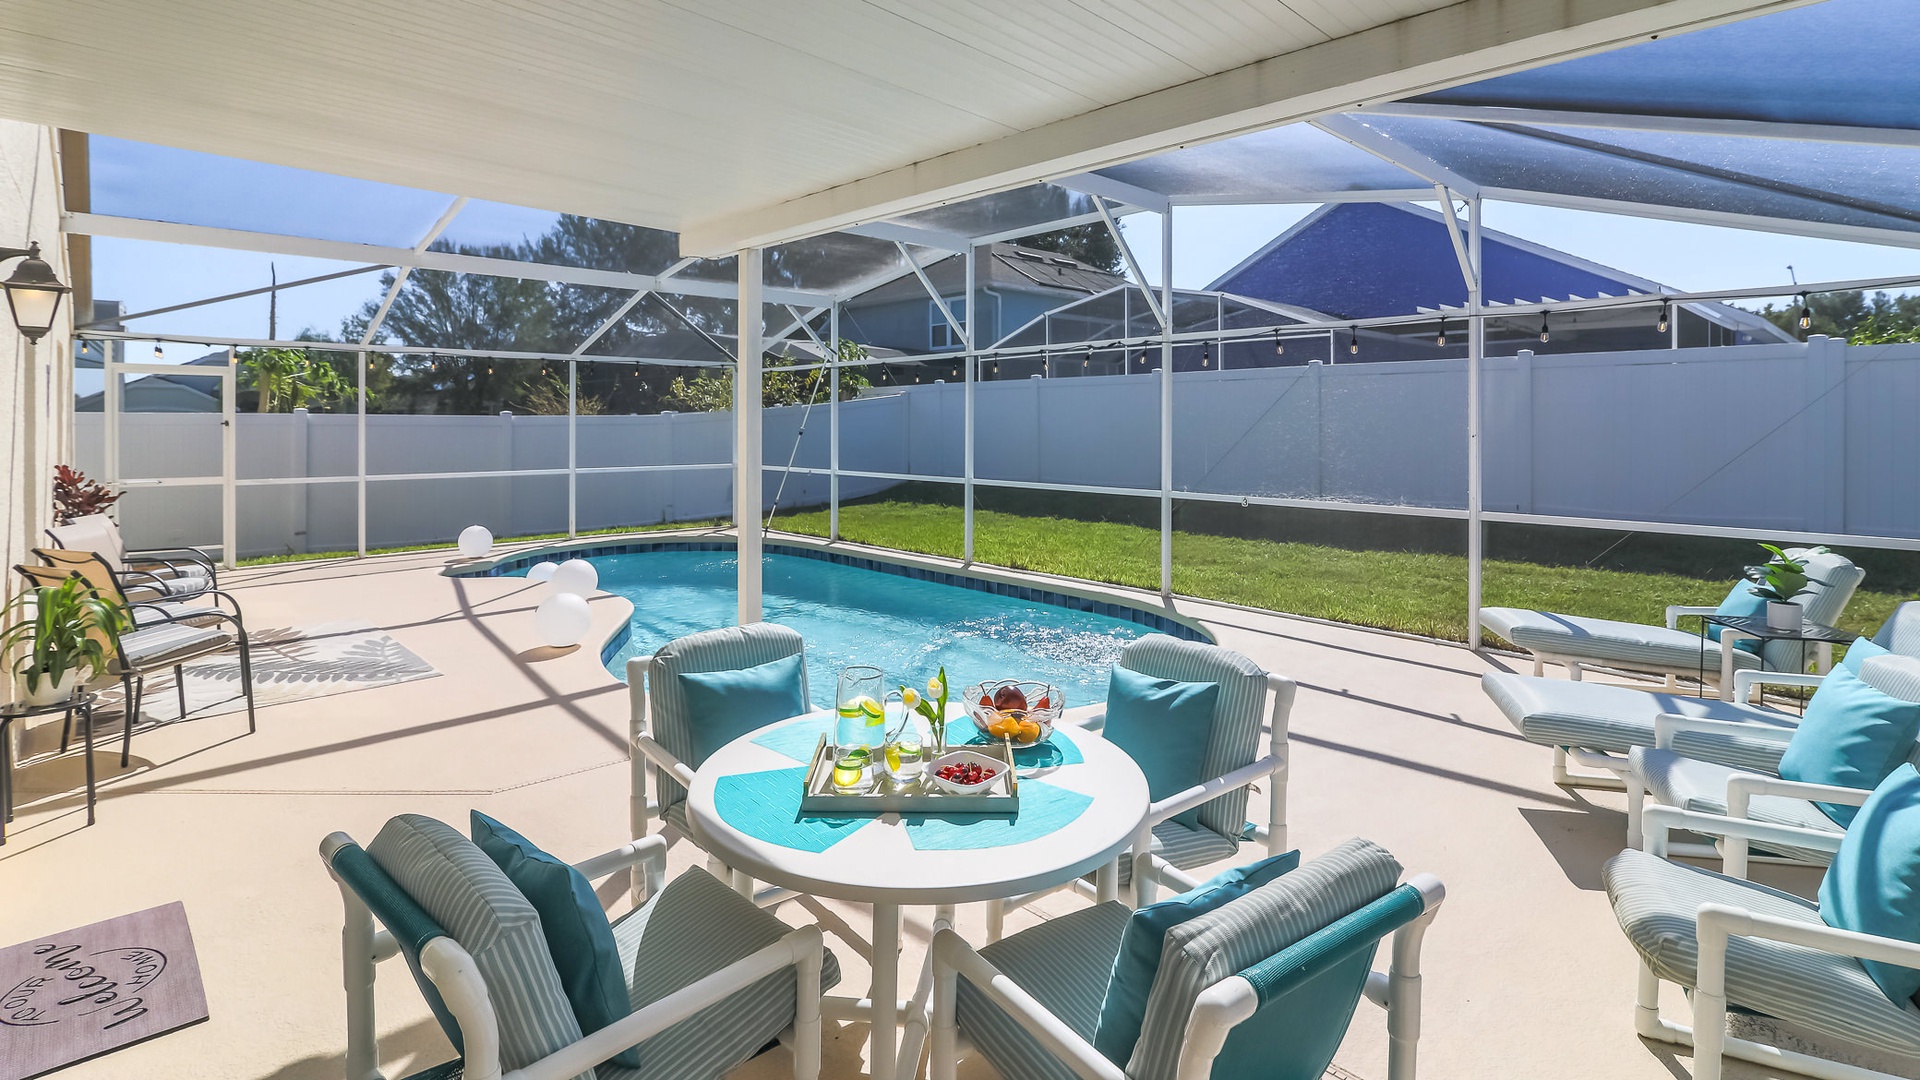 Have a meal by the pool with seating for 4